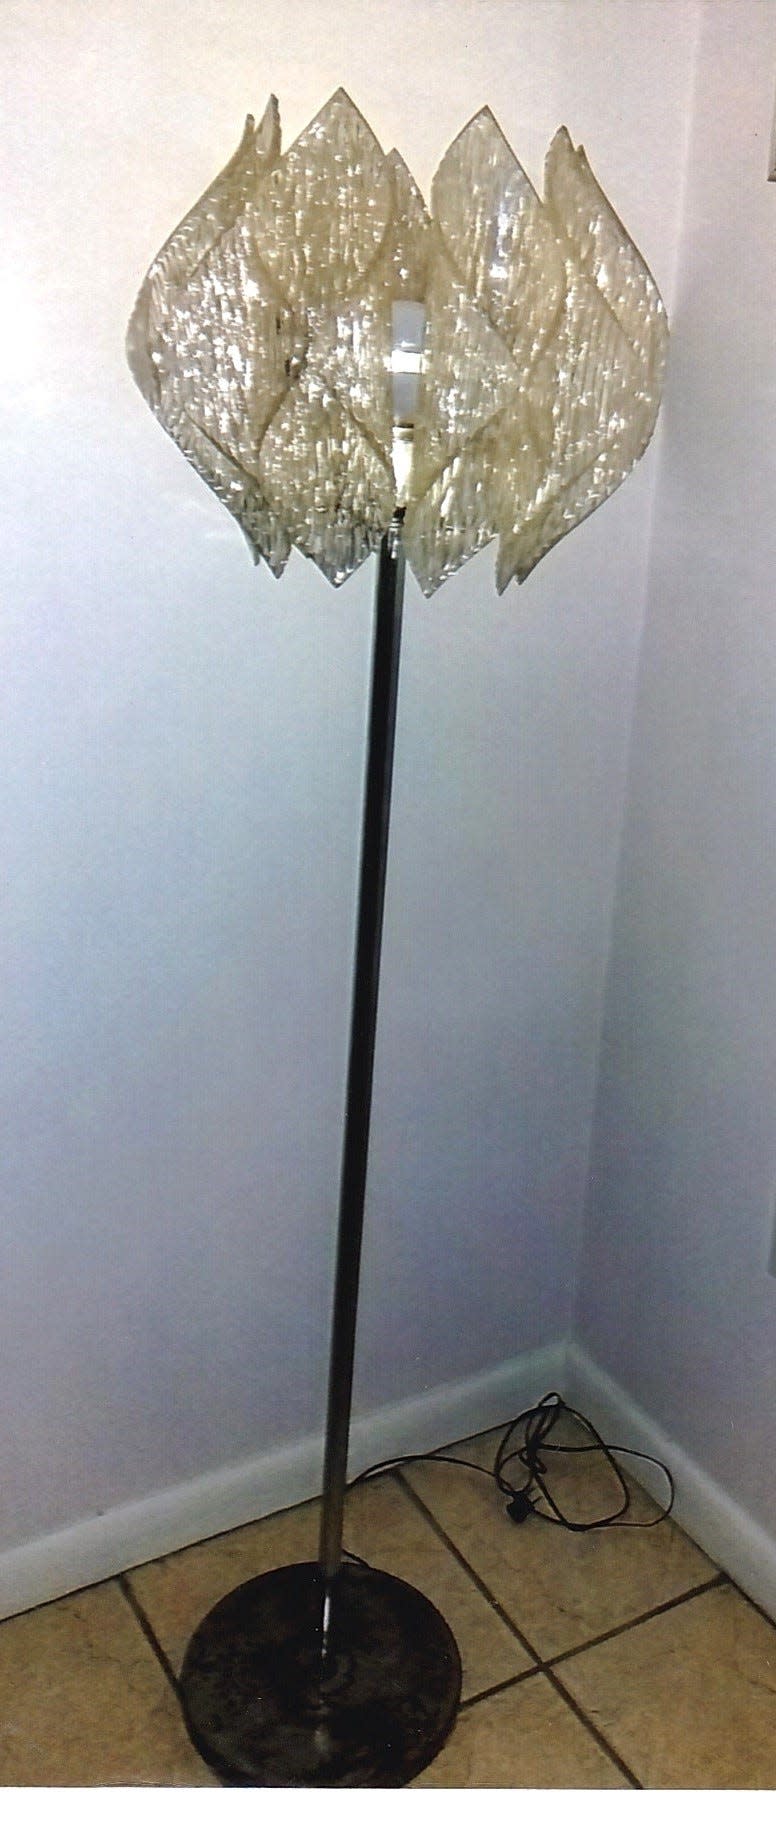 This floor lamp was likely made after World War II. The fact that it has no manufacturer’s labels, etc., indicates it was made as a generic look alike, perhaps in the manner of an Italian designer.